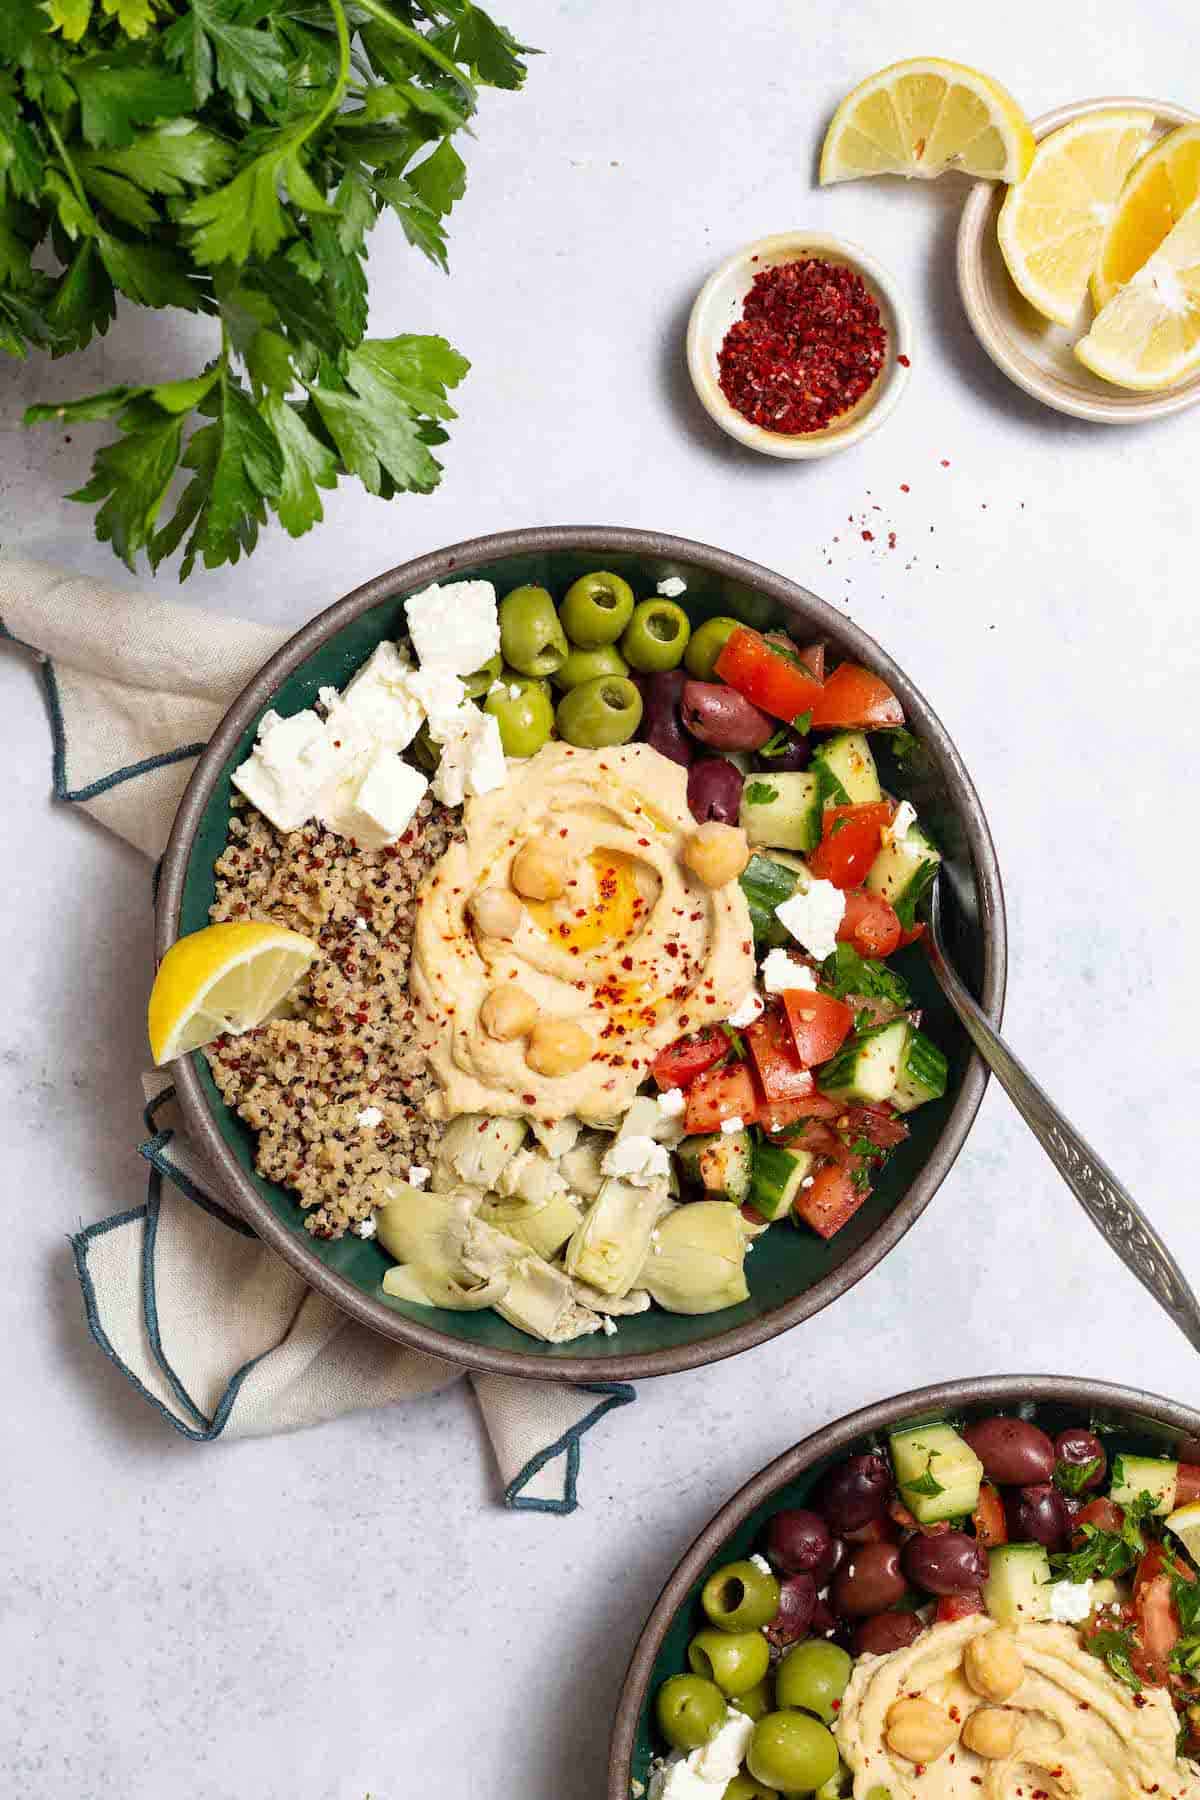 An overhead photo of 2 mediterranean bowls with quinoa, one with a fork in it. These are surrounded by a bunch of parsley, and bowls of lemon slices and aleppo pepper.